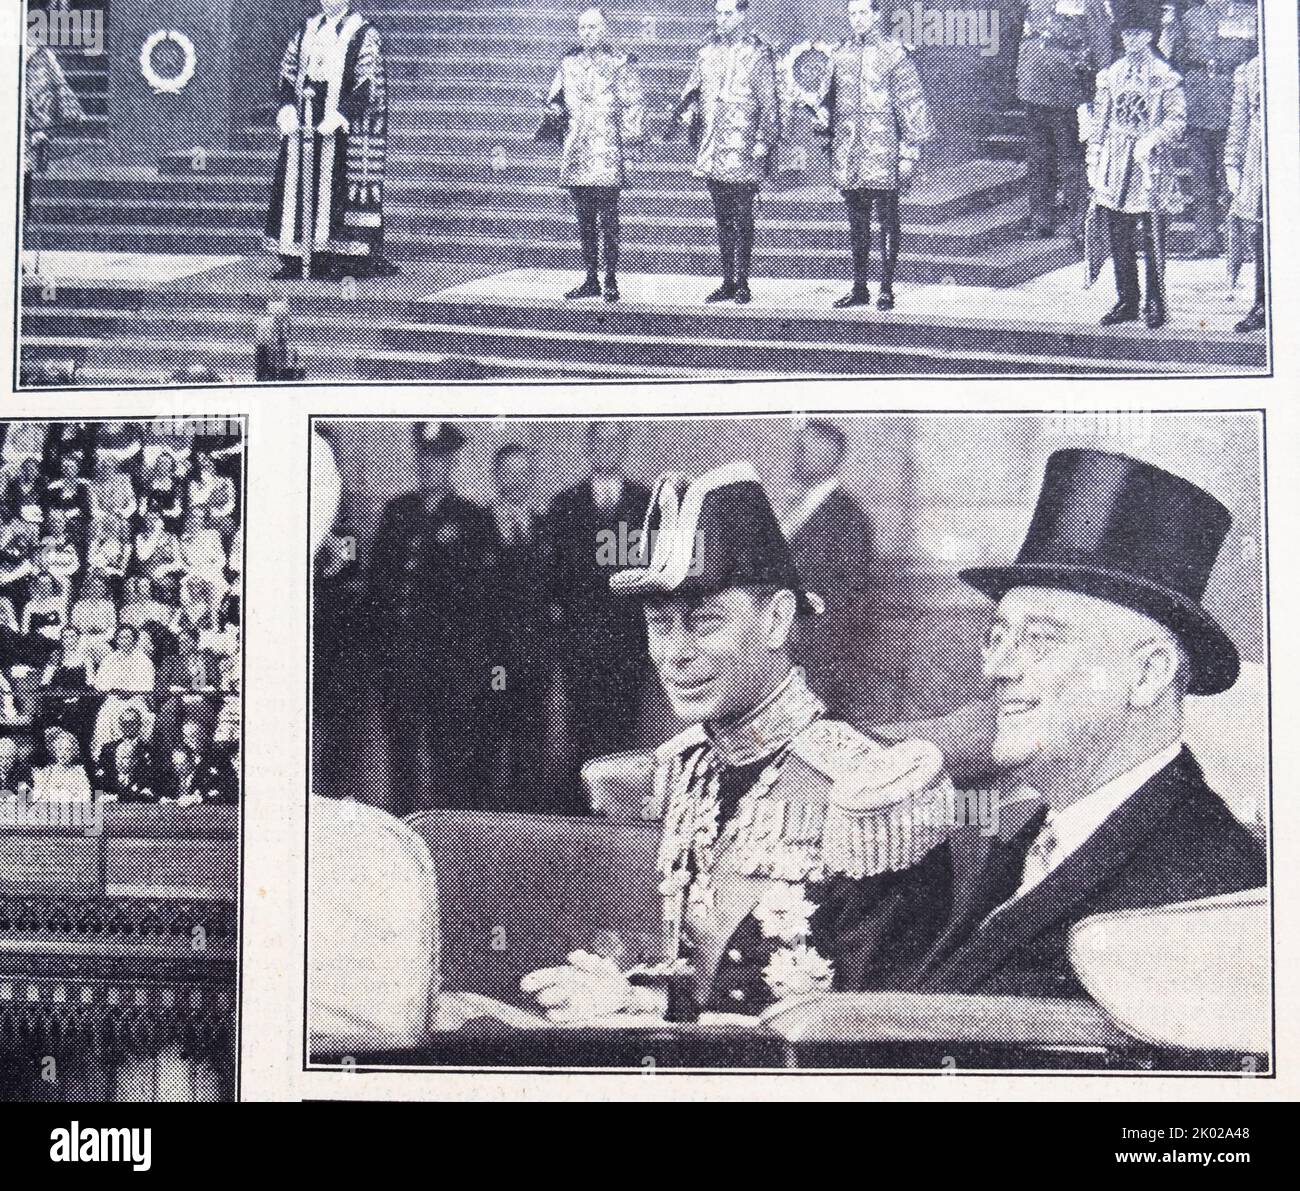 King George VI and President Roosevelt wearing a top hat sitting together in a car on his visit to the United States of America US, USA in 1939 featured in The Times newspaper memorial after the king died in February 1952 London UK Stock Photo